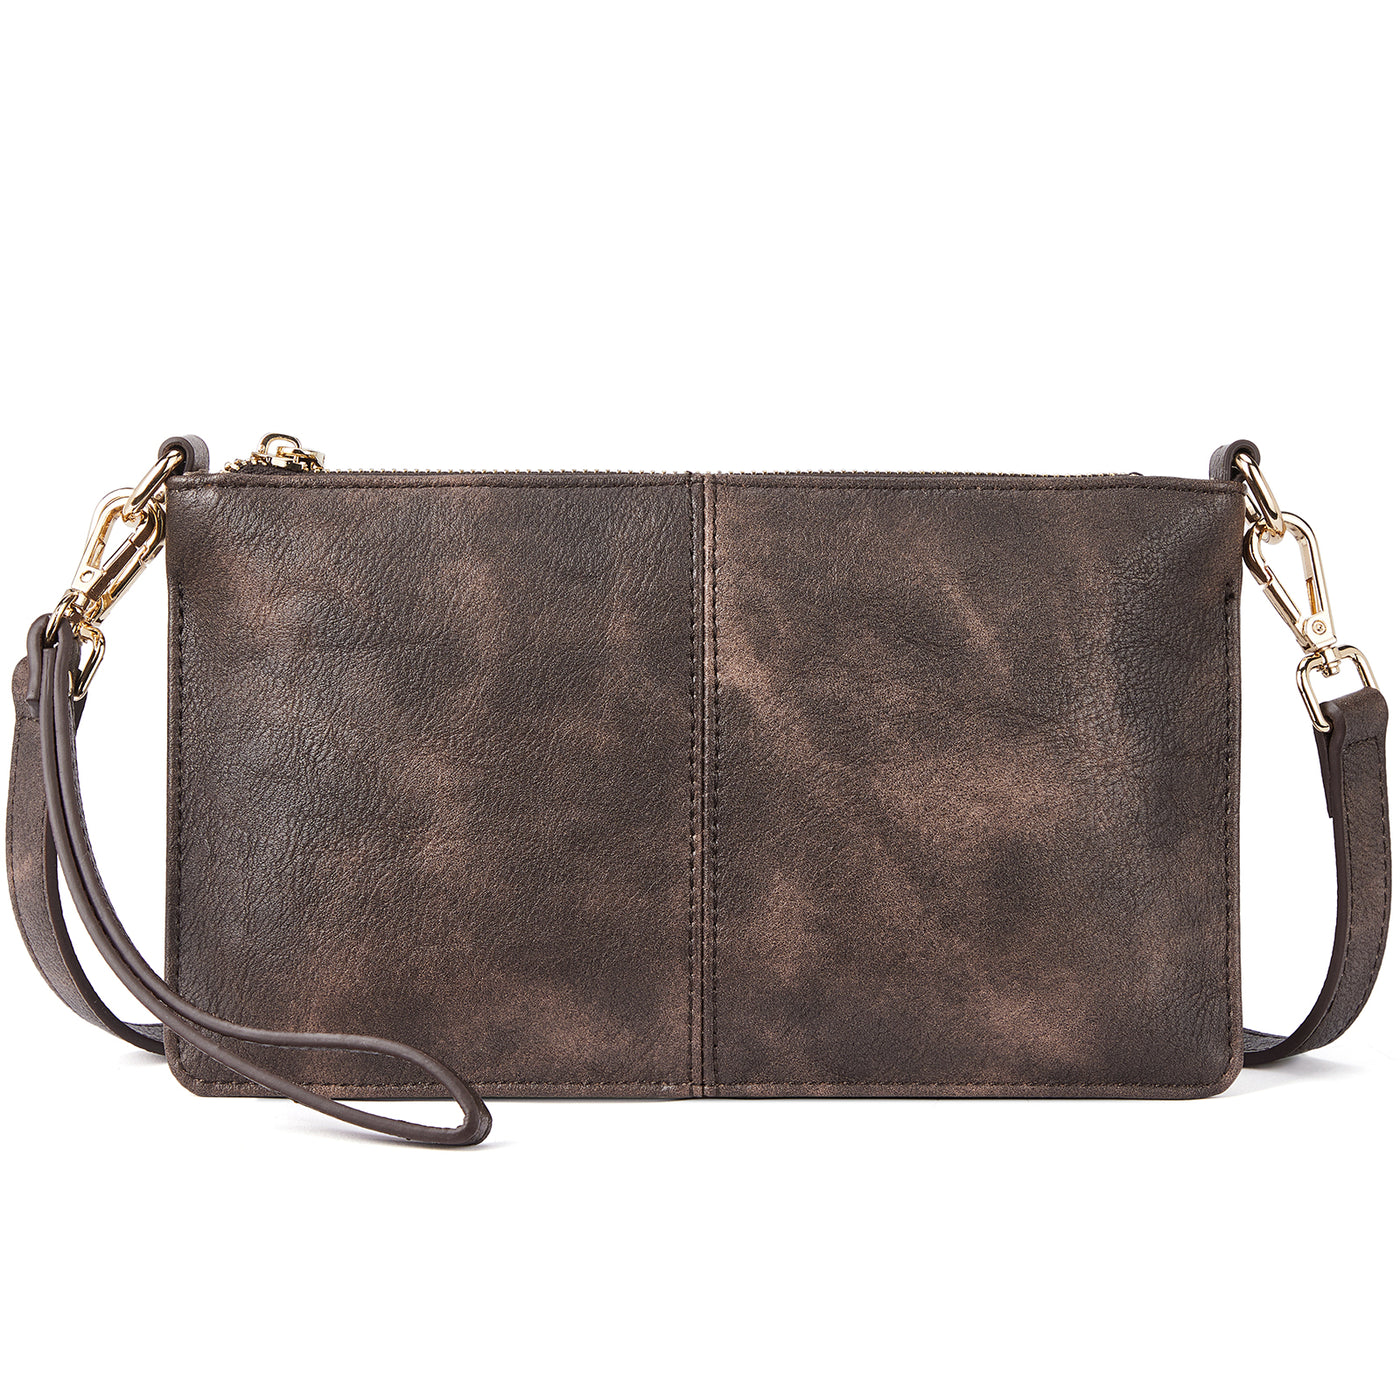 Nola  Chic and Sustainable - The Vegan Leather Envelope Clutch Purse